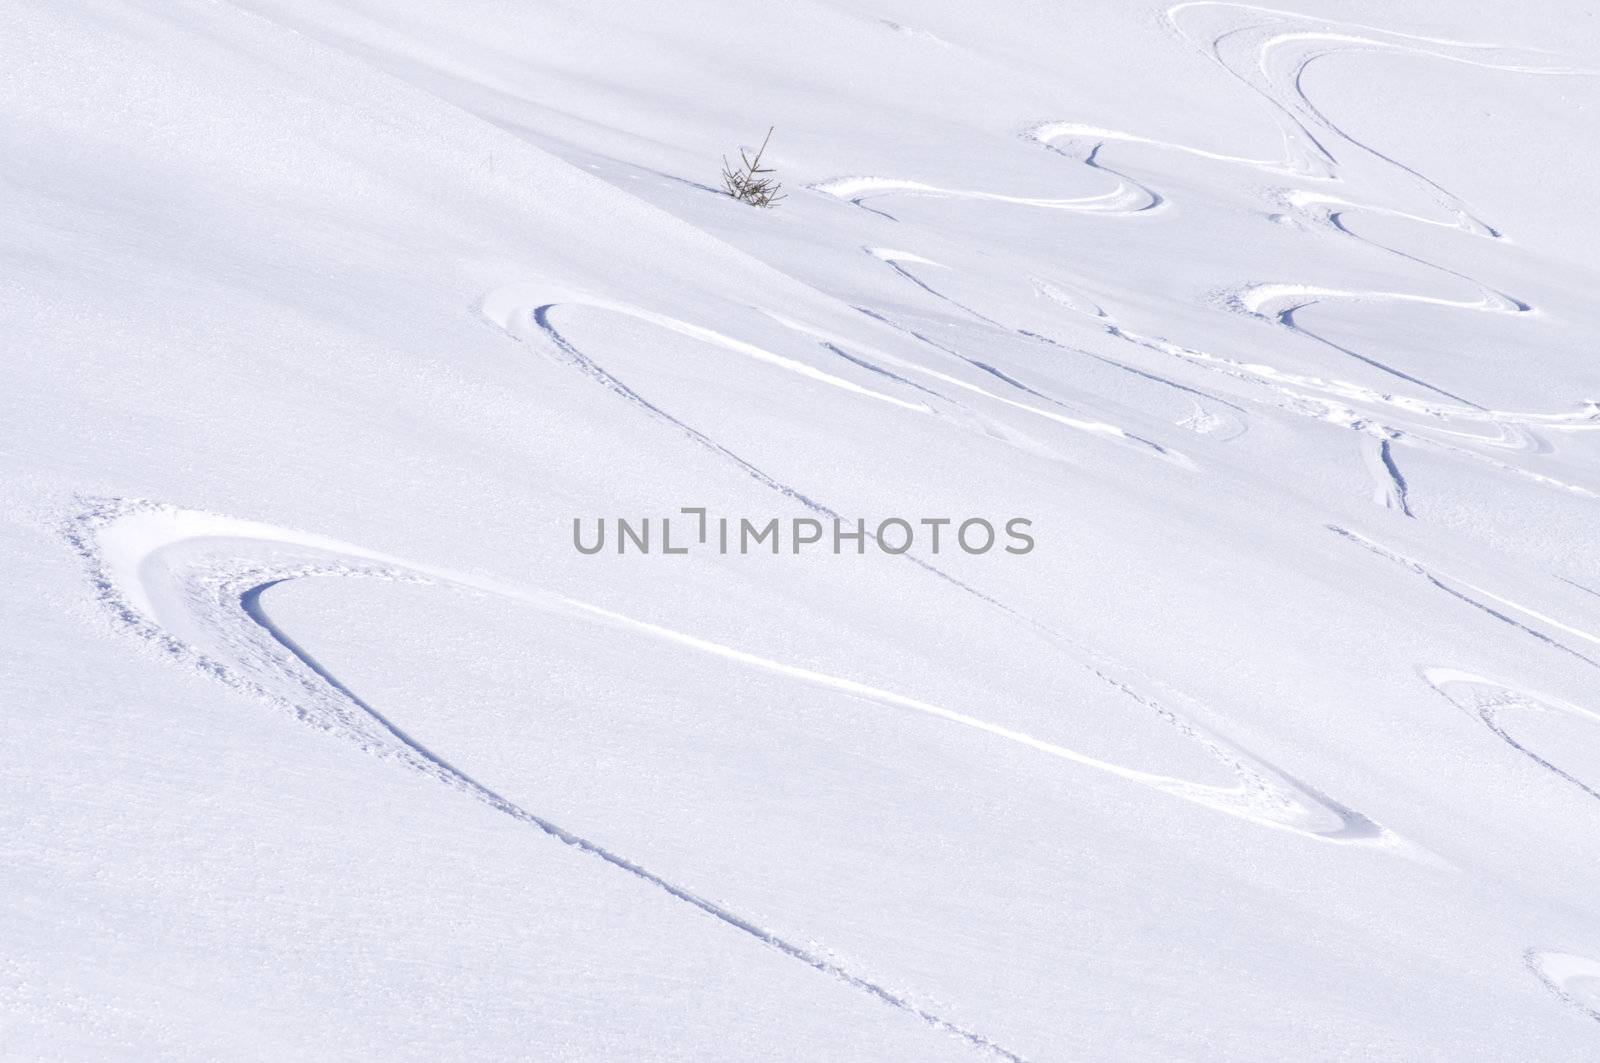 freeride tracks on powder snow in the mountains